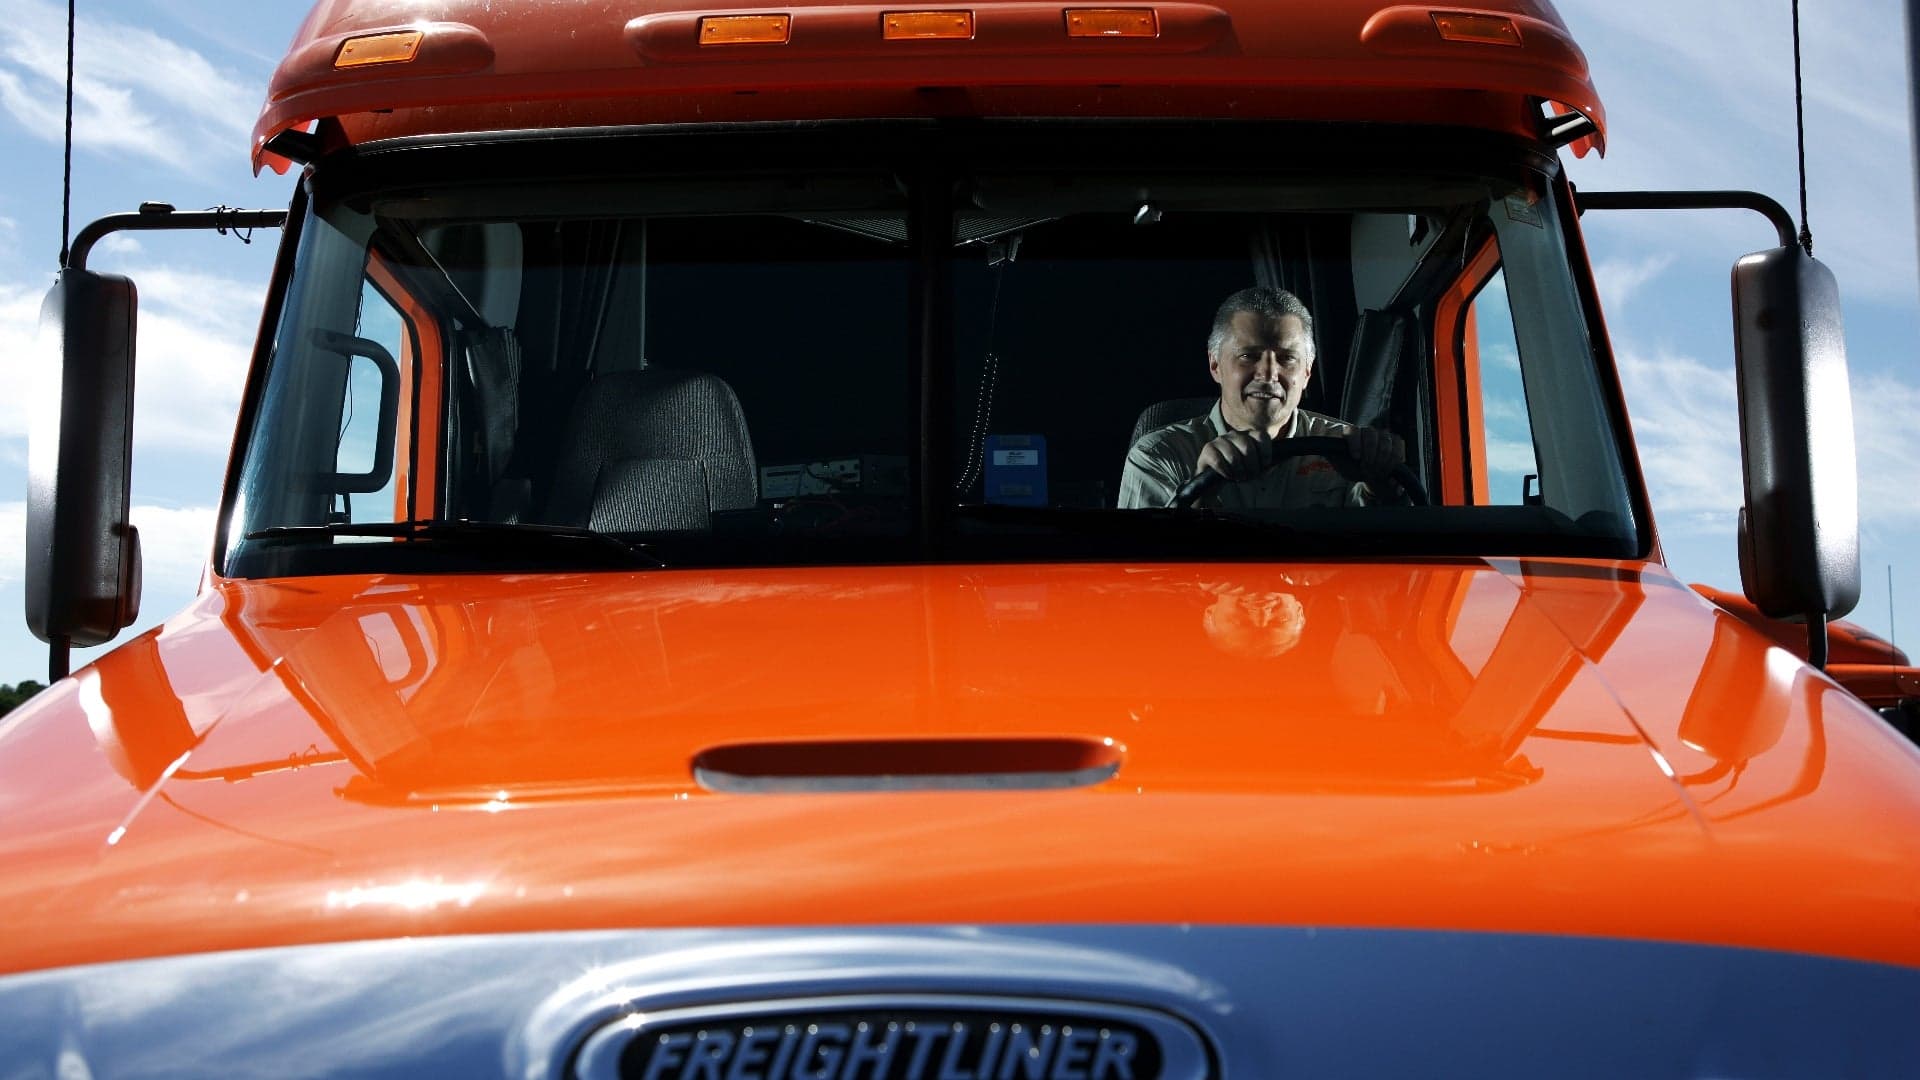 New Study Says Autonomous Tech Won’t Replace Truck Drivers in Large Numbers Anytime Soon